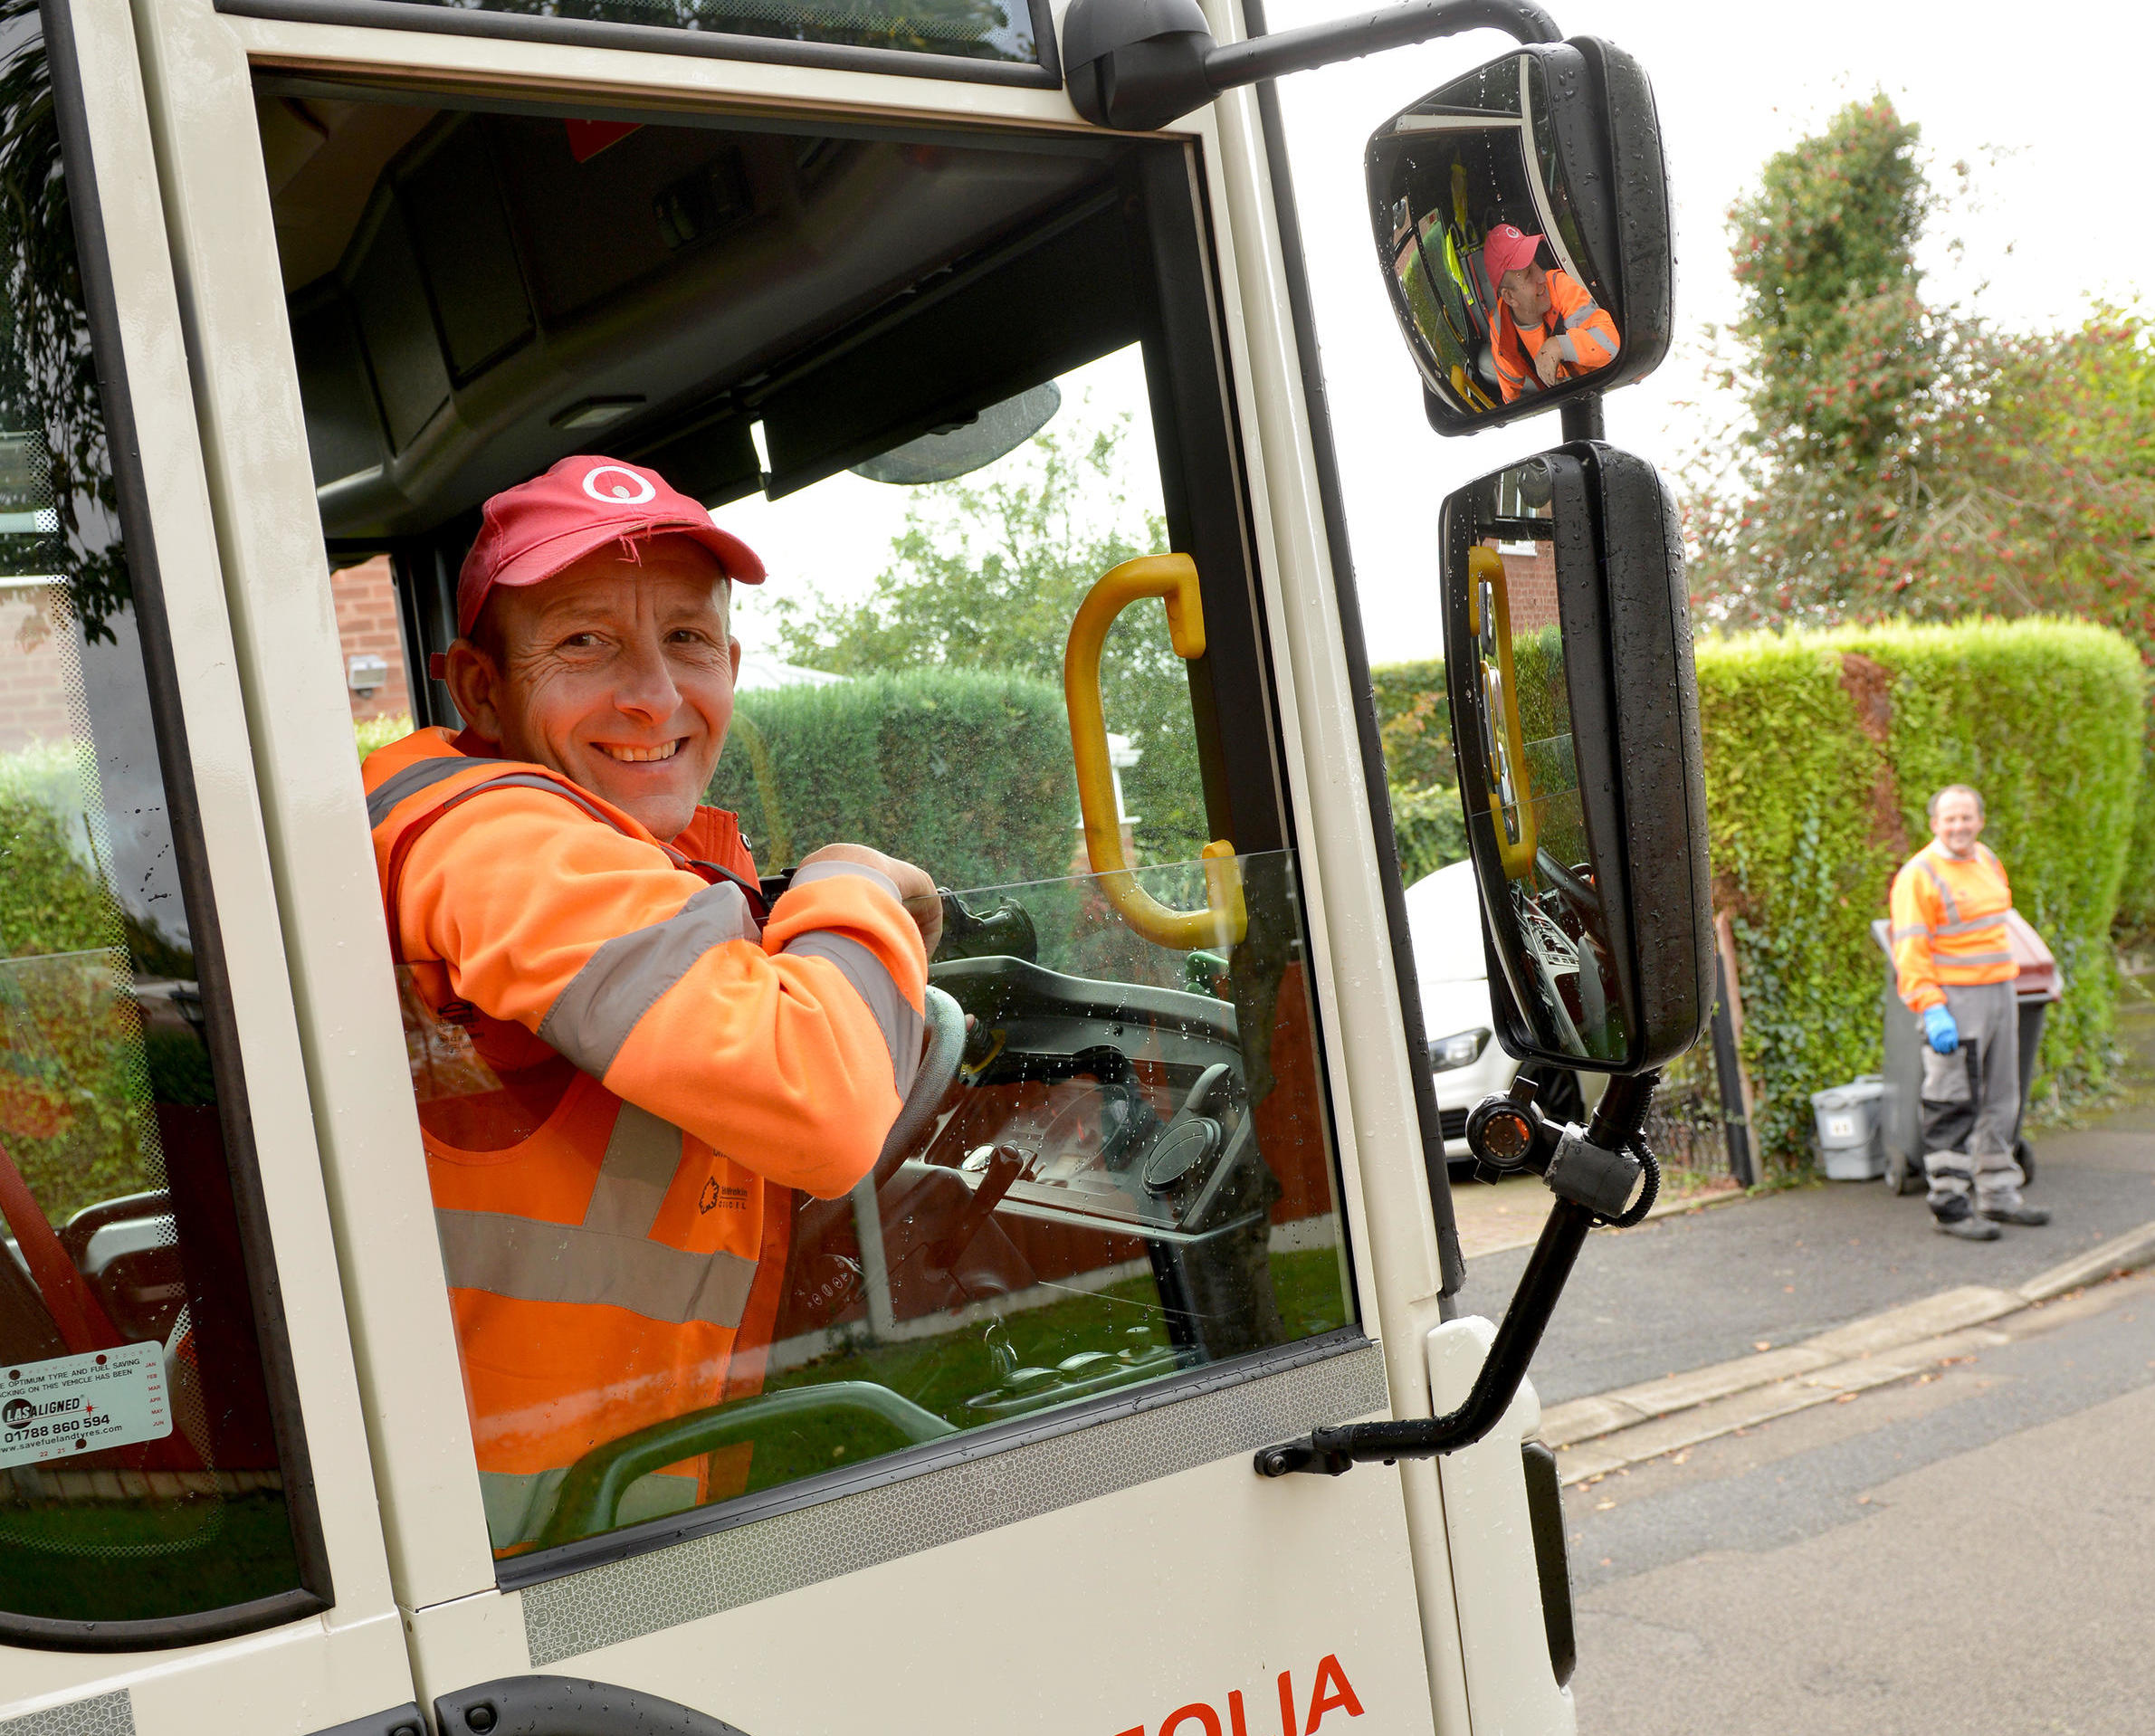 Photo showing a cheerful driver in a bin collection truck, with another crew member in the backgroun collecting bins.